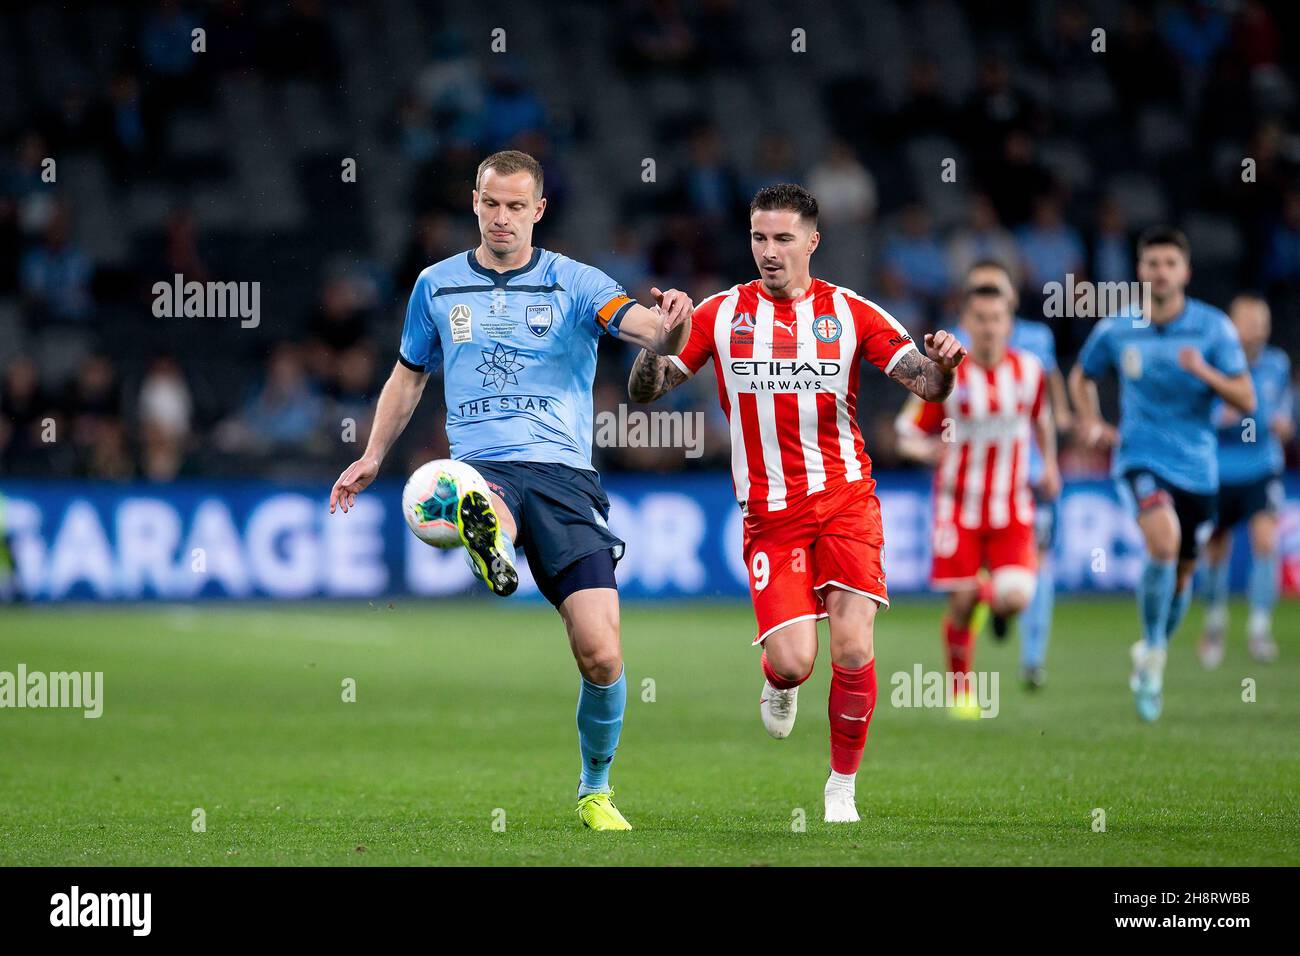 Sydney FC defender Alex Wilkinson (4) clears the ball under pressure from Melbourne City forward Jamie Maclaren (9) (Photo by Damian Briggs/ Speed Media) Stock Photo